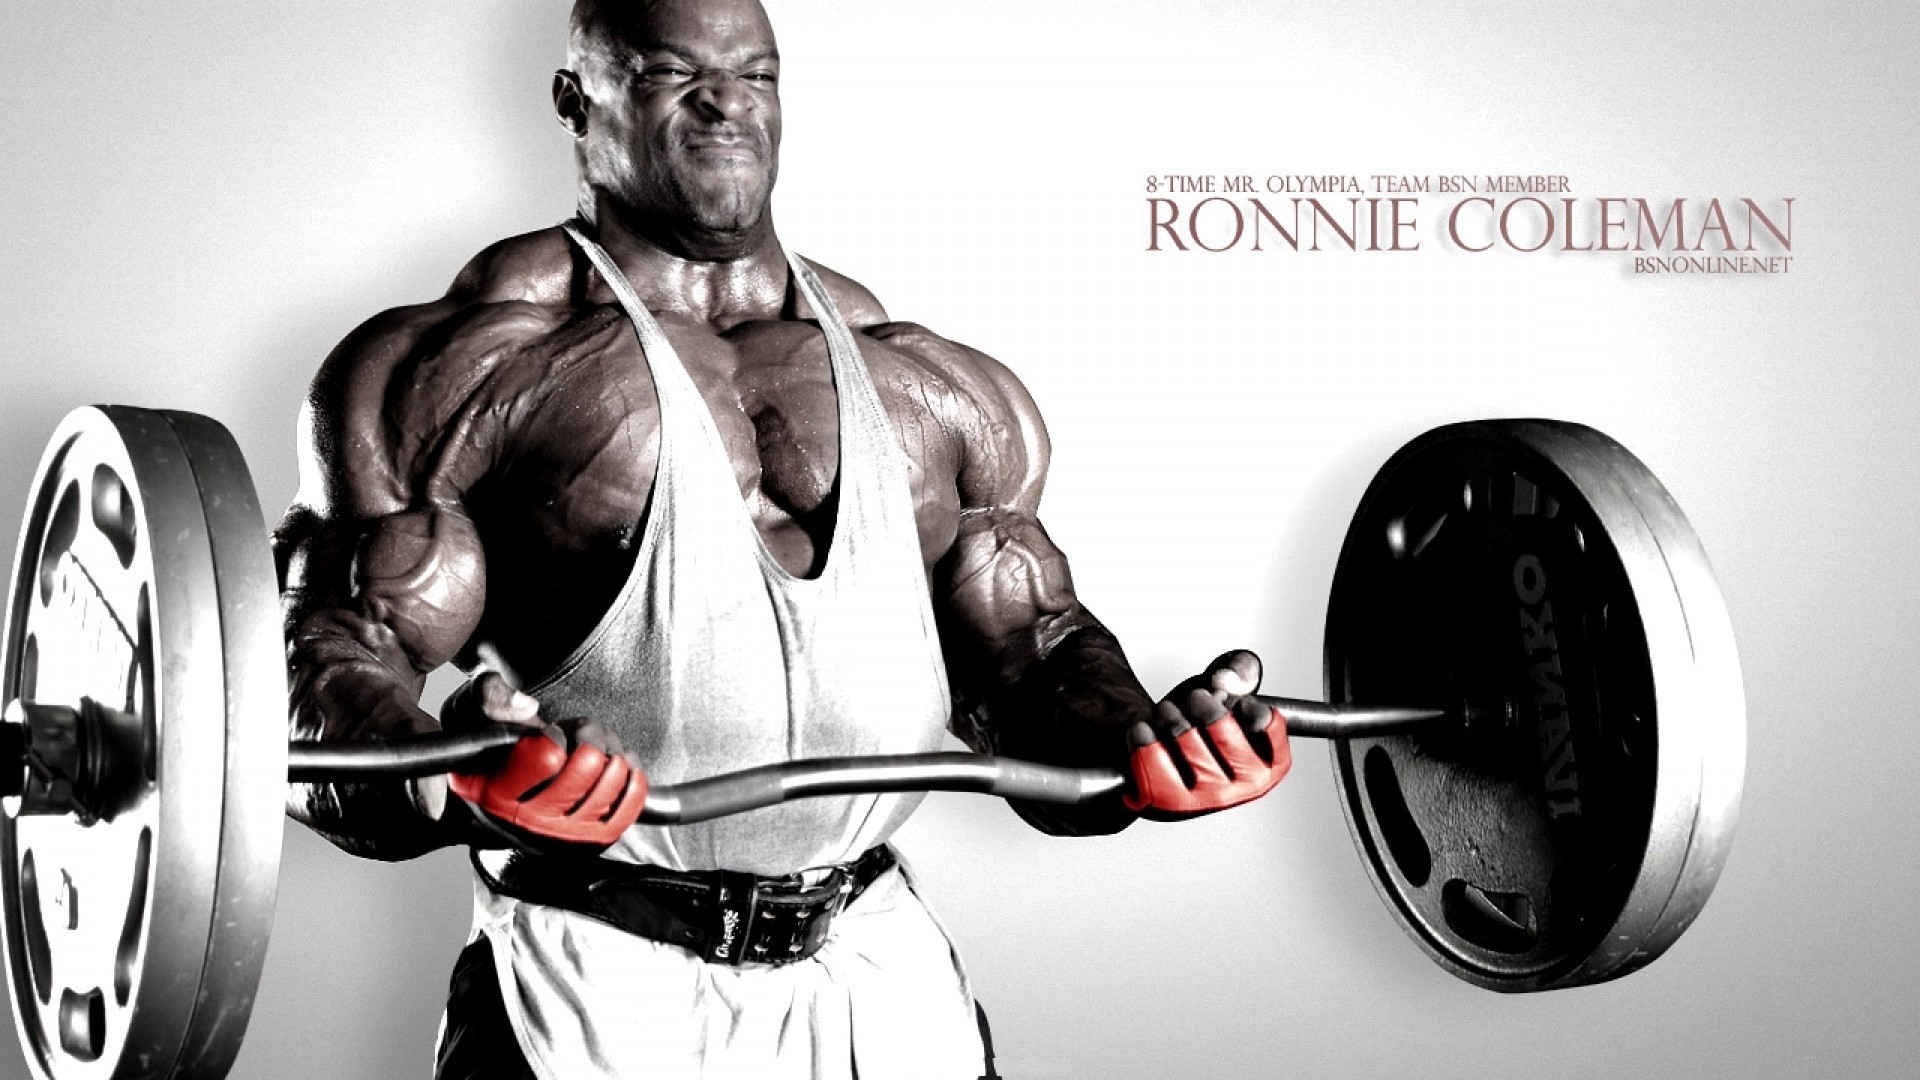 1920x1080 Bodybuilder Live Images HD Wallpapers WPBG Collection | HD Wallpapers |  Pinterest | Bodybuilder, Hd wallpaper and Wallpaper